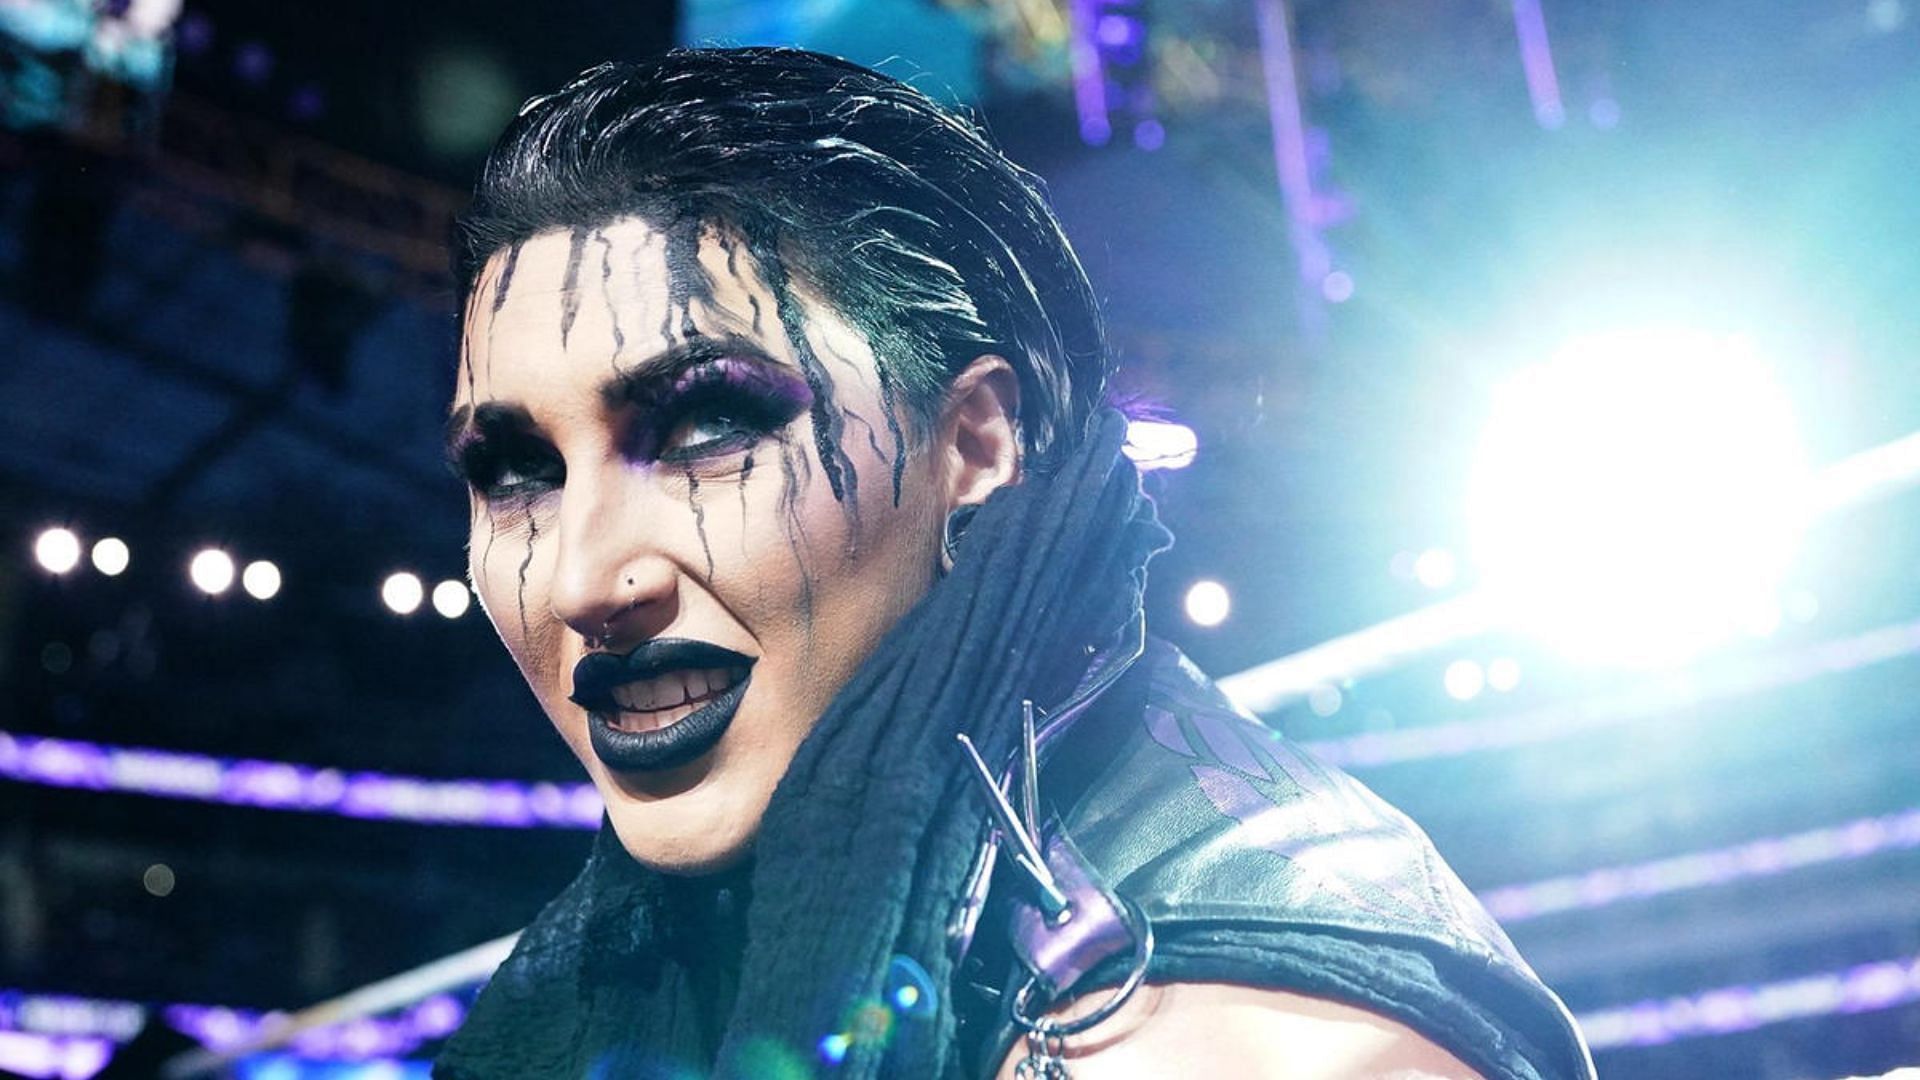 What is next for Rhea Ripley in WWE?